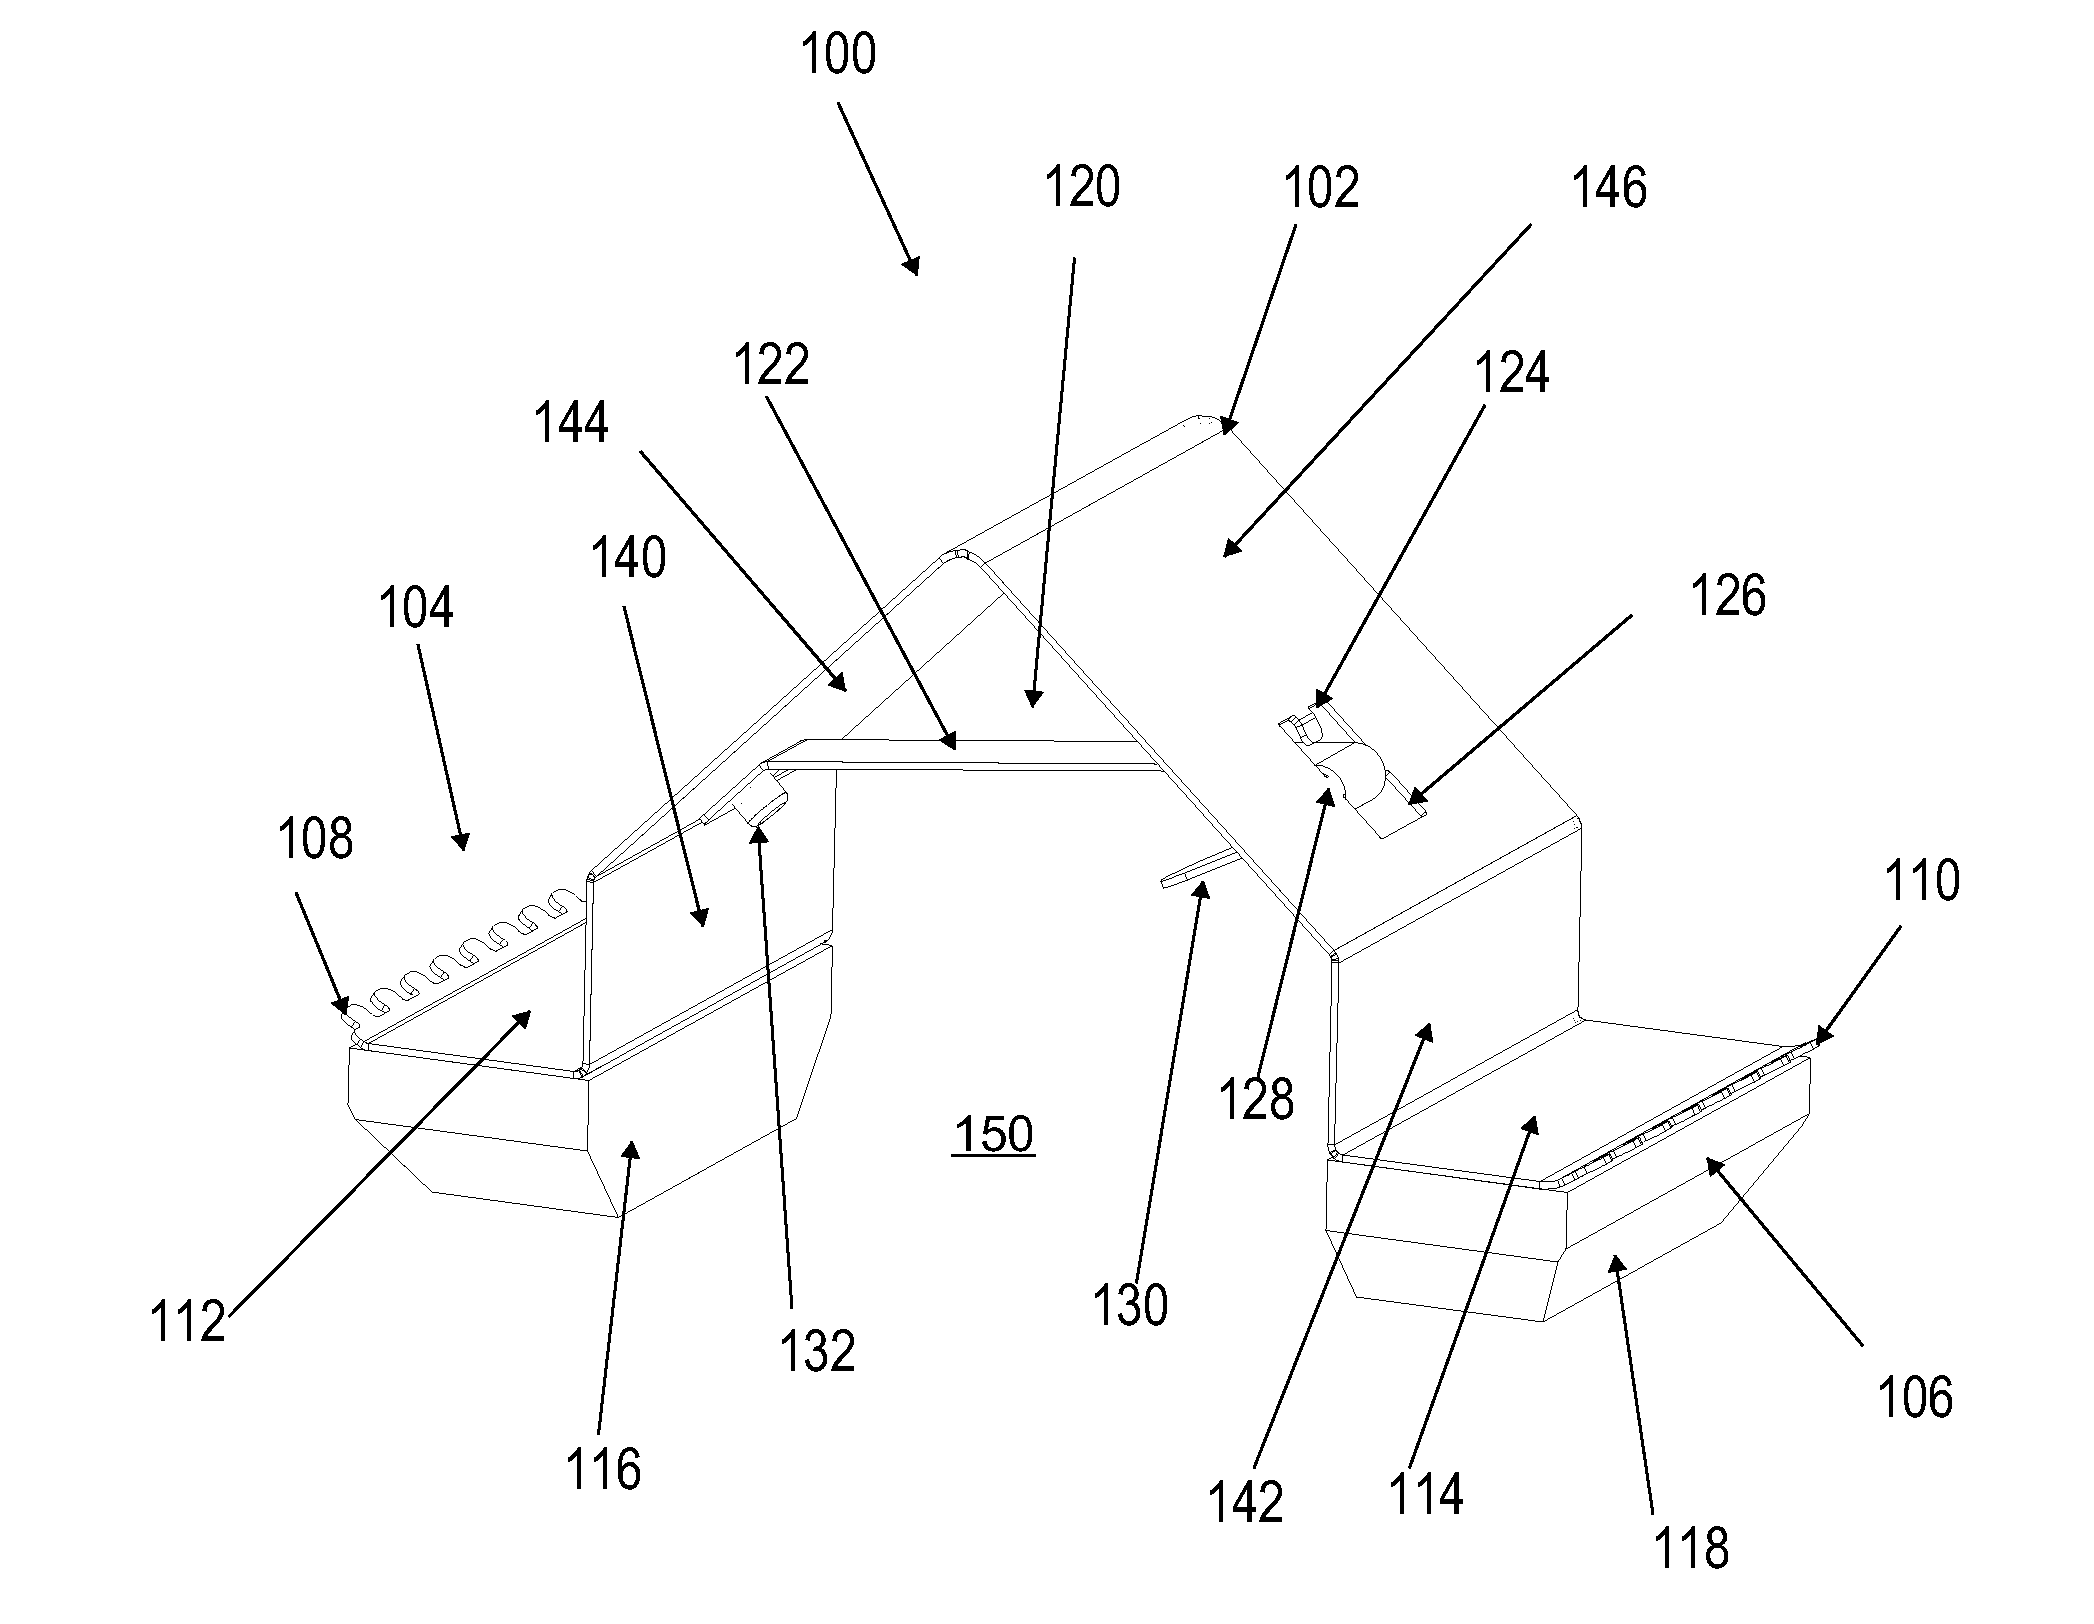 Radially tensioned wound or skin treatment devices and methods